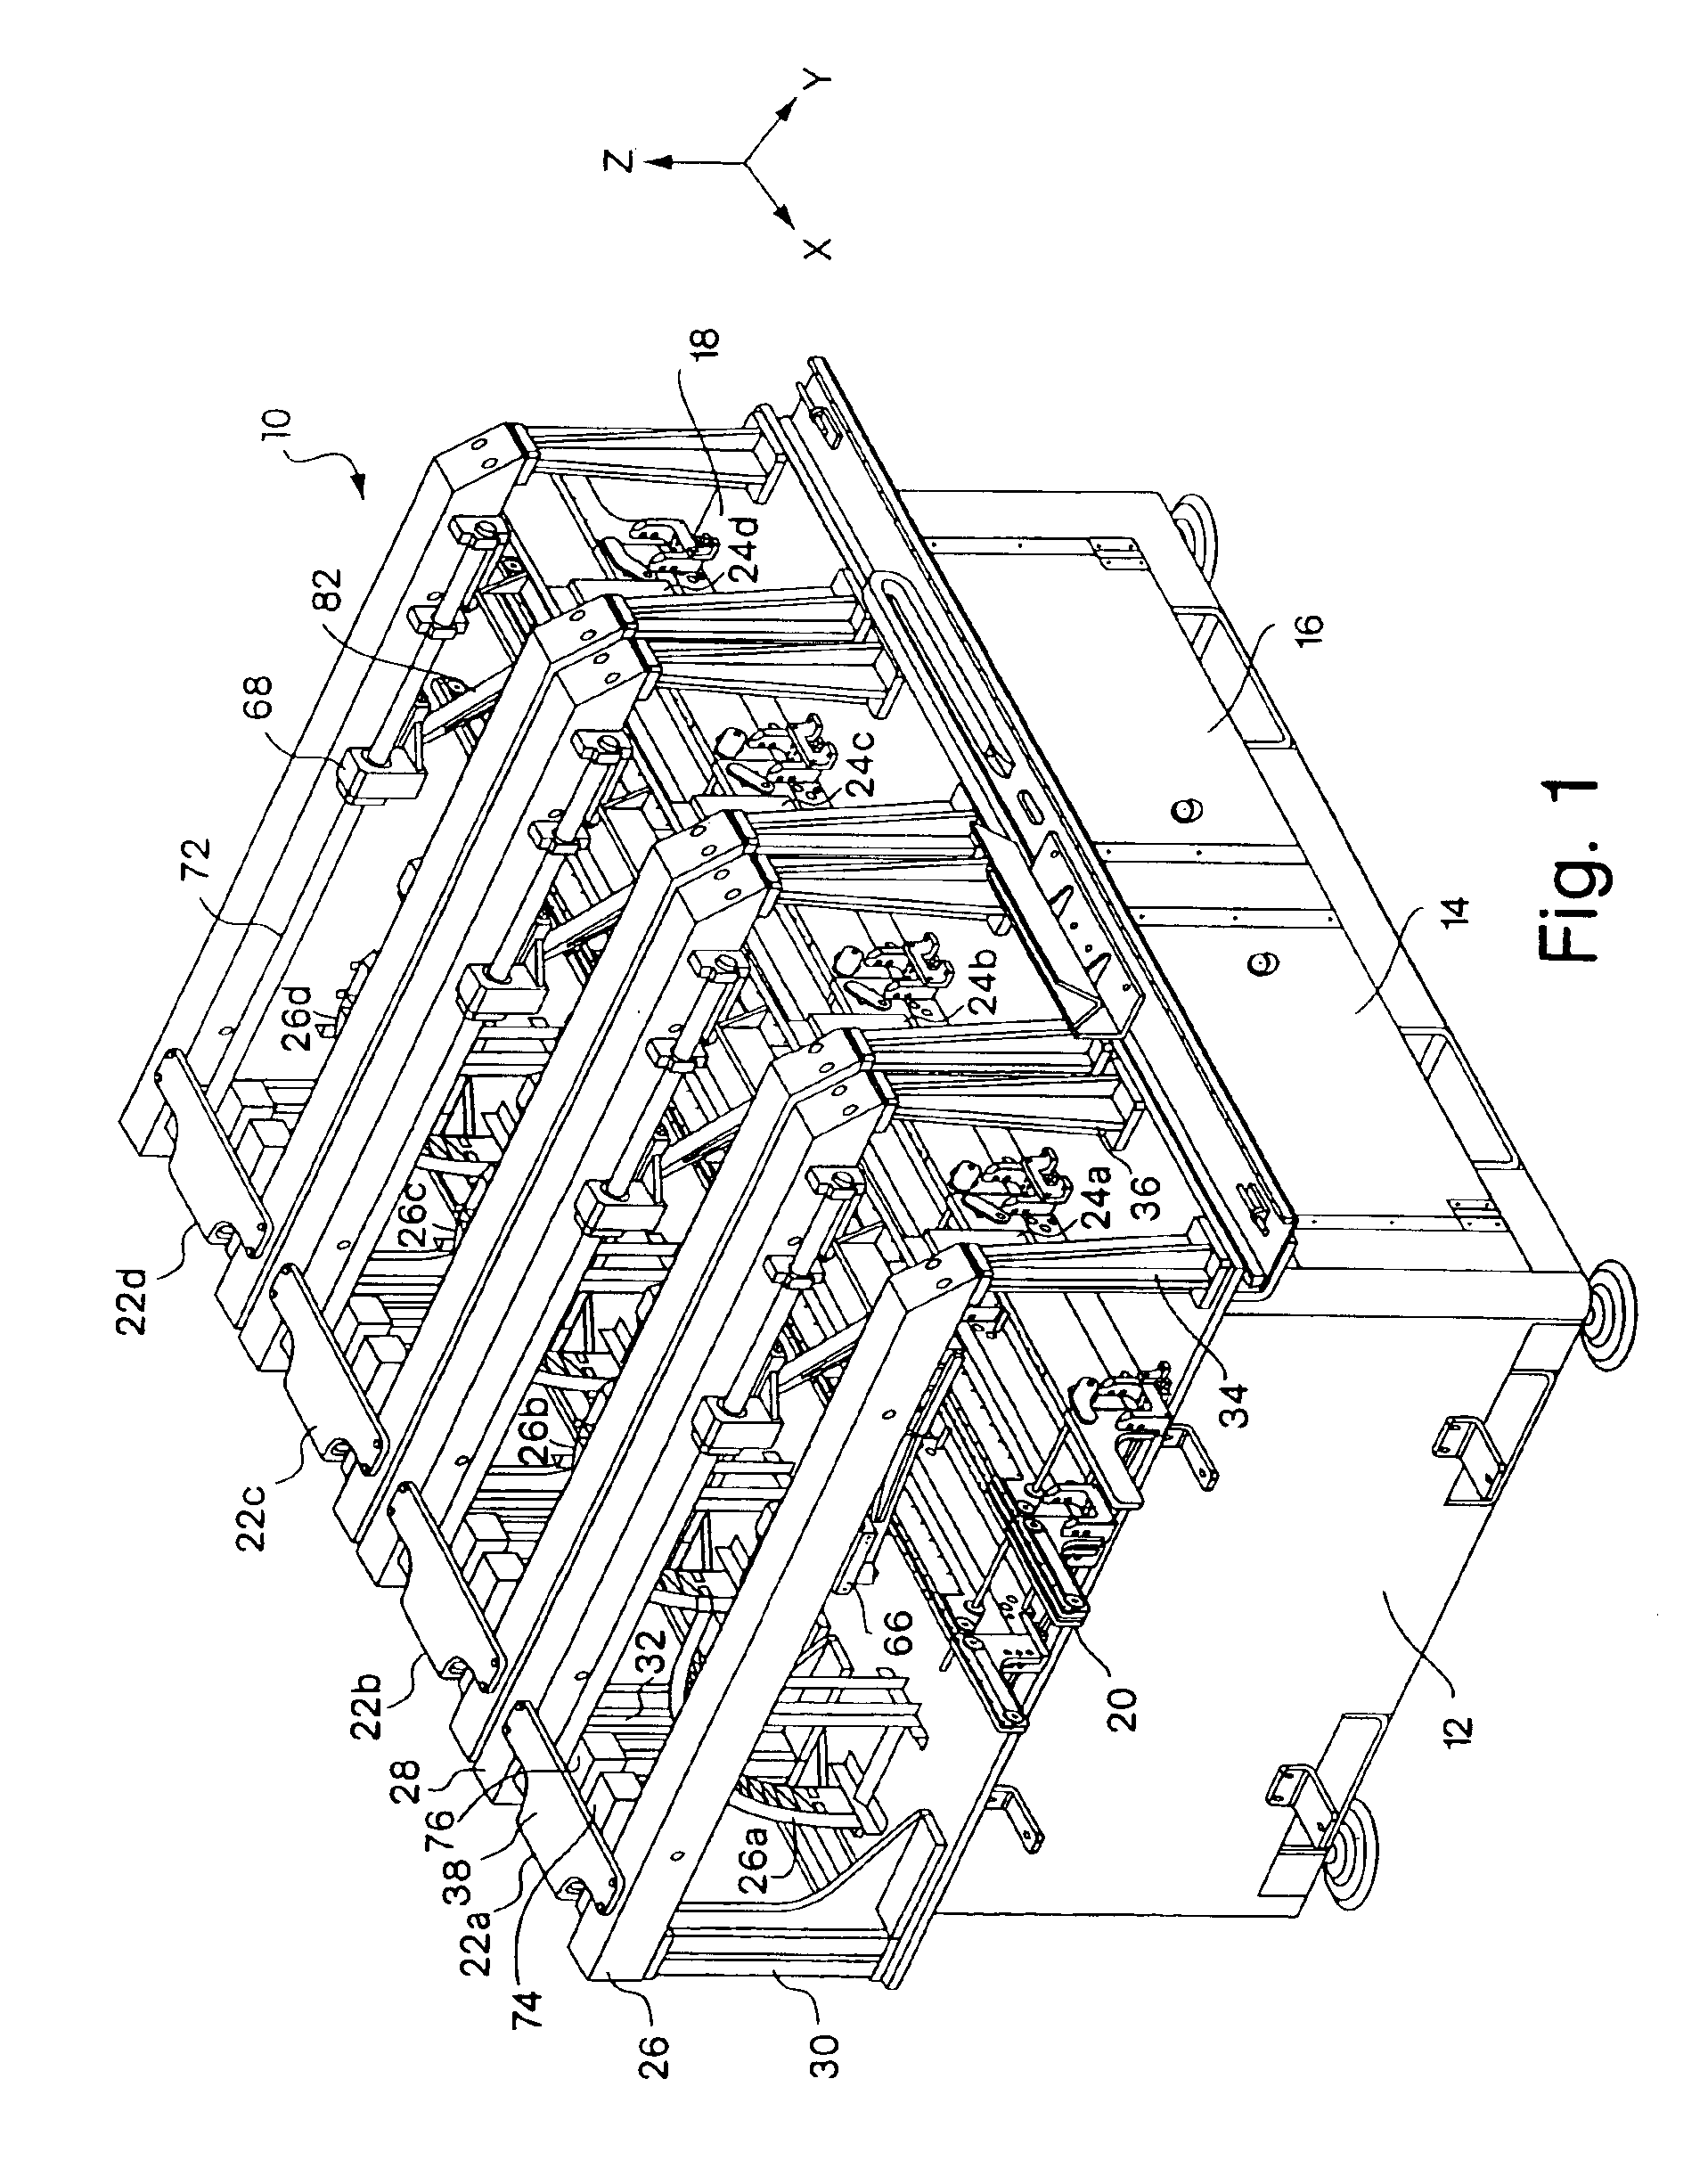 System and method for controlling a conveyor system configuration to accommodate different size substrates